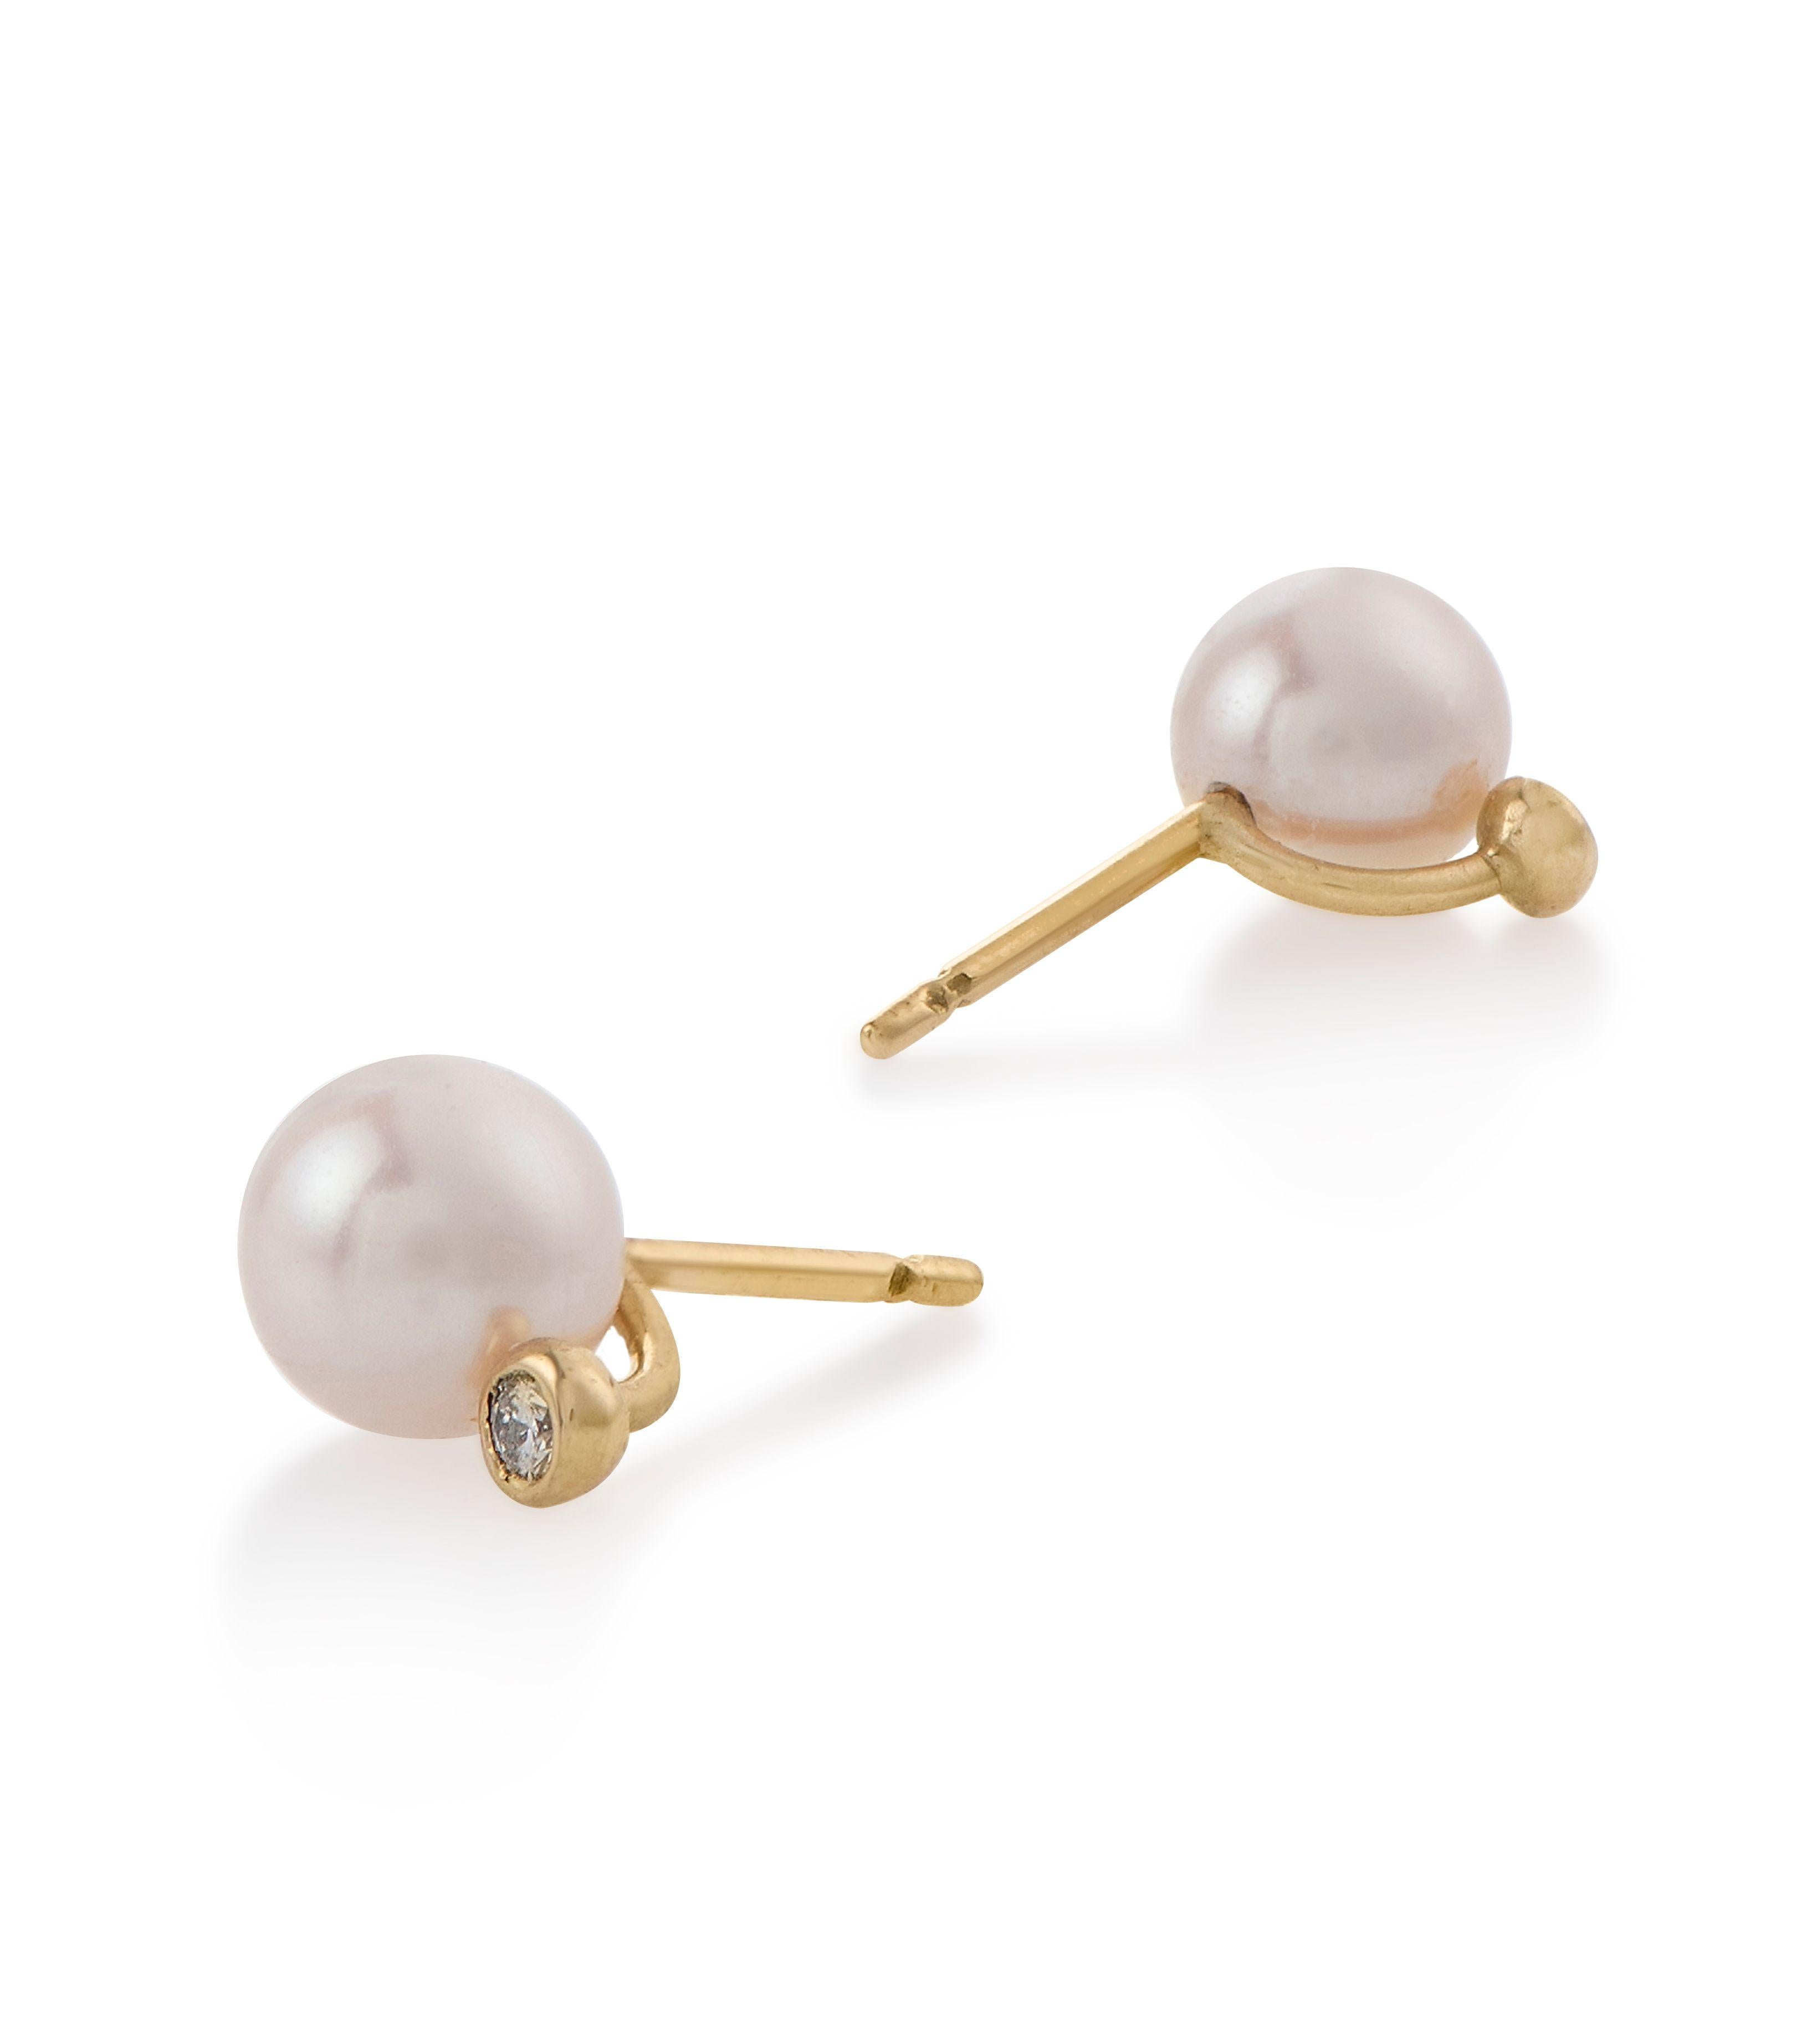 These chic and timeless mini studs, are the perfect everyday pair of earrings. They are set with lustrous pearls and beautifully complimented by a pair of glimmering diamonds. They are easy to wear and can be styled for all occasions, ranging from